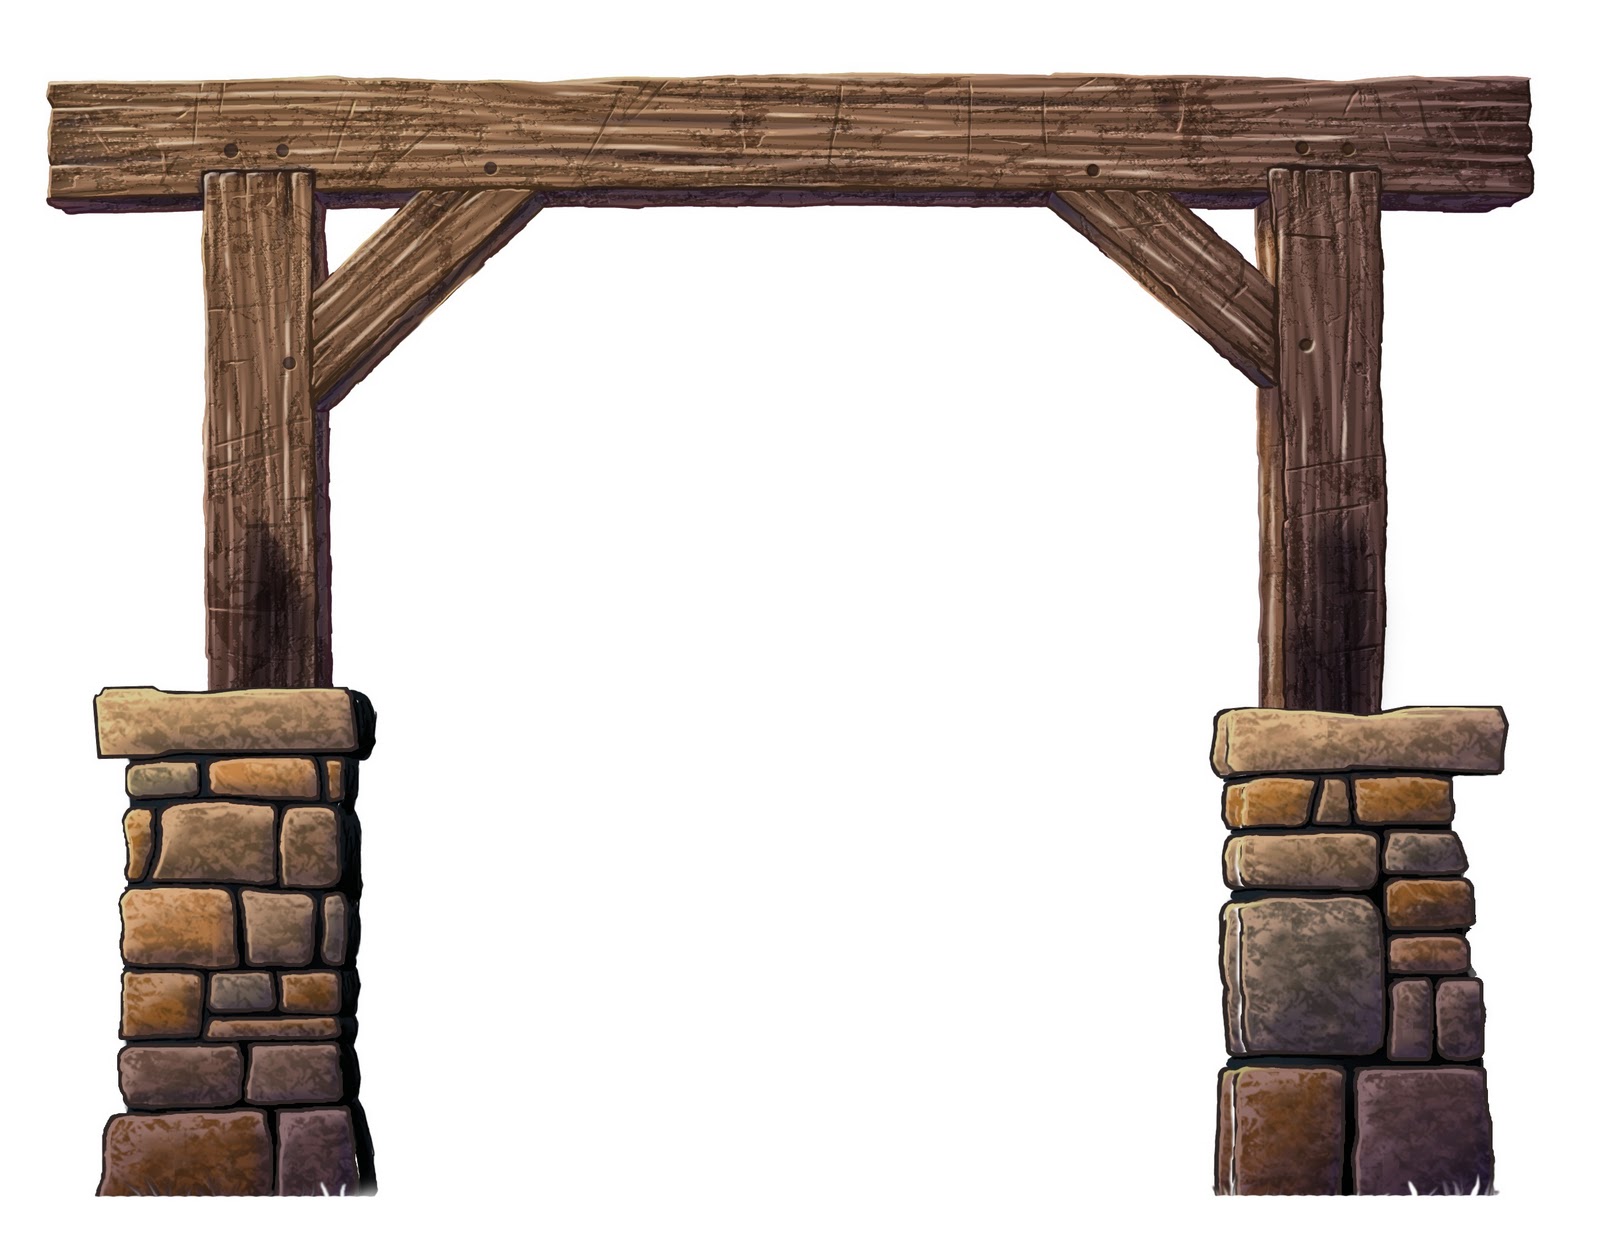 Was Asked To Make A Western Gatepost For A Vacation Bible School